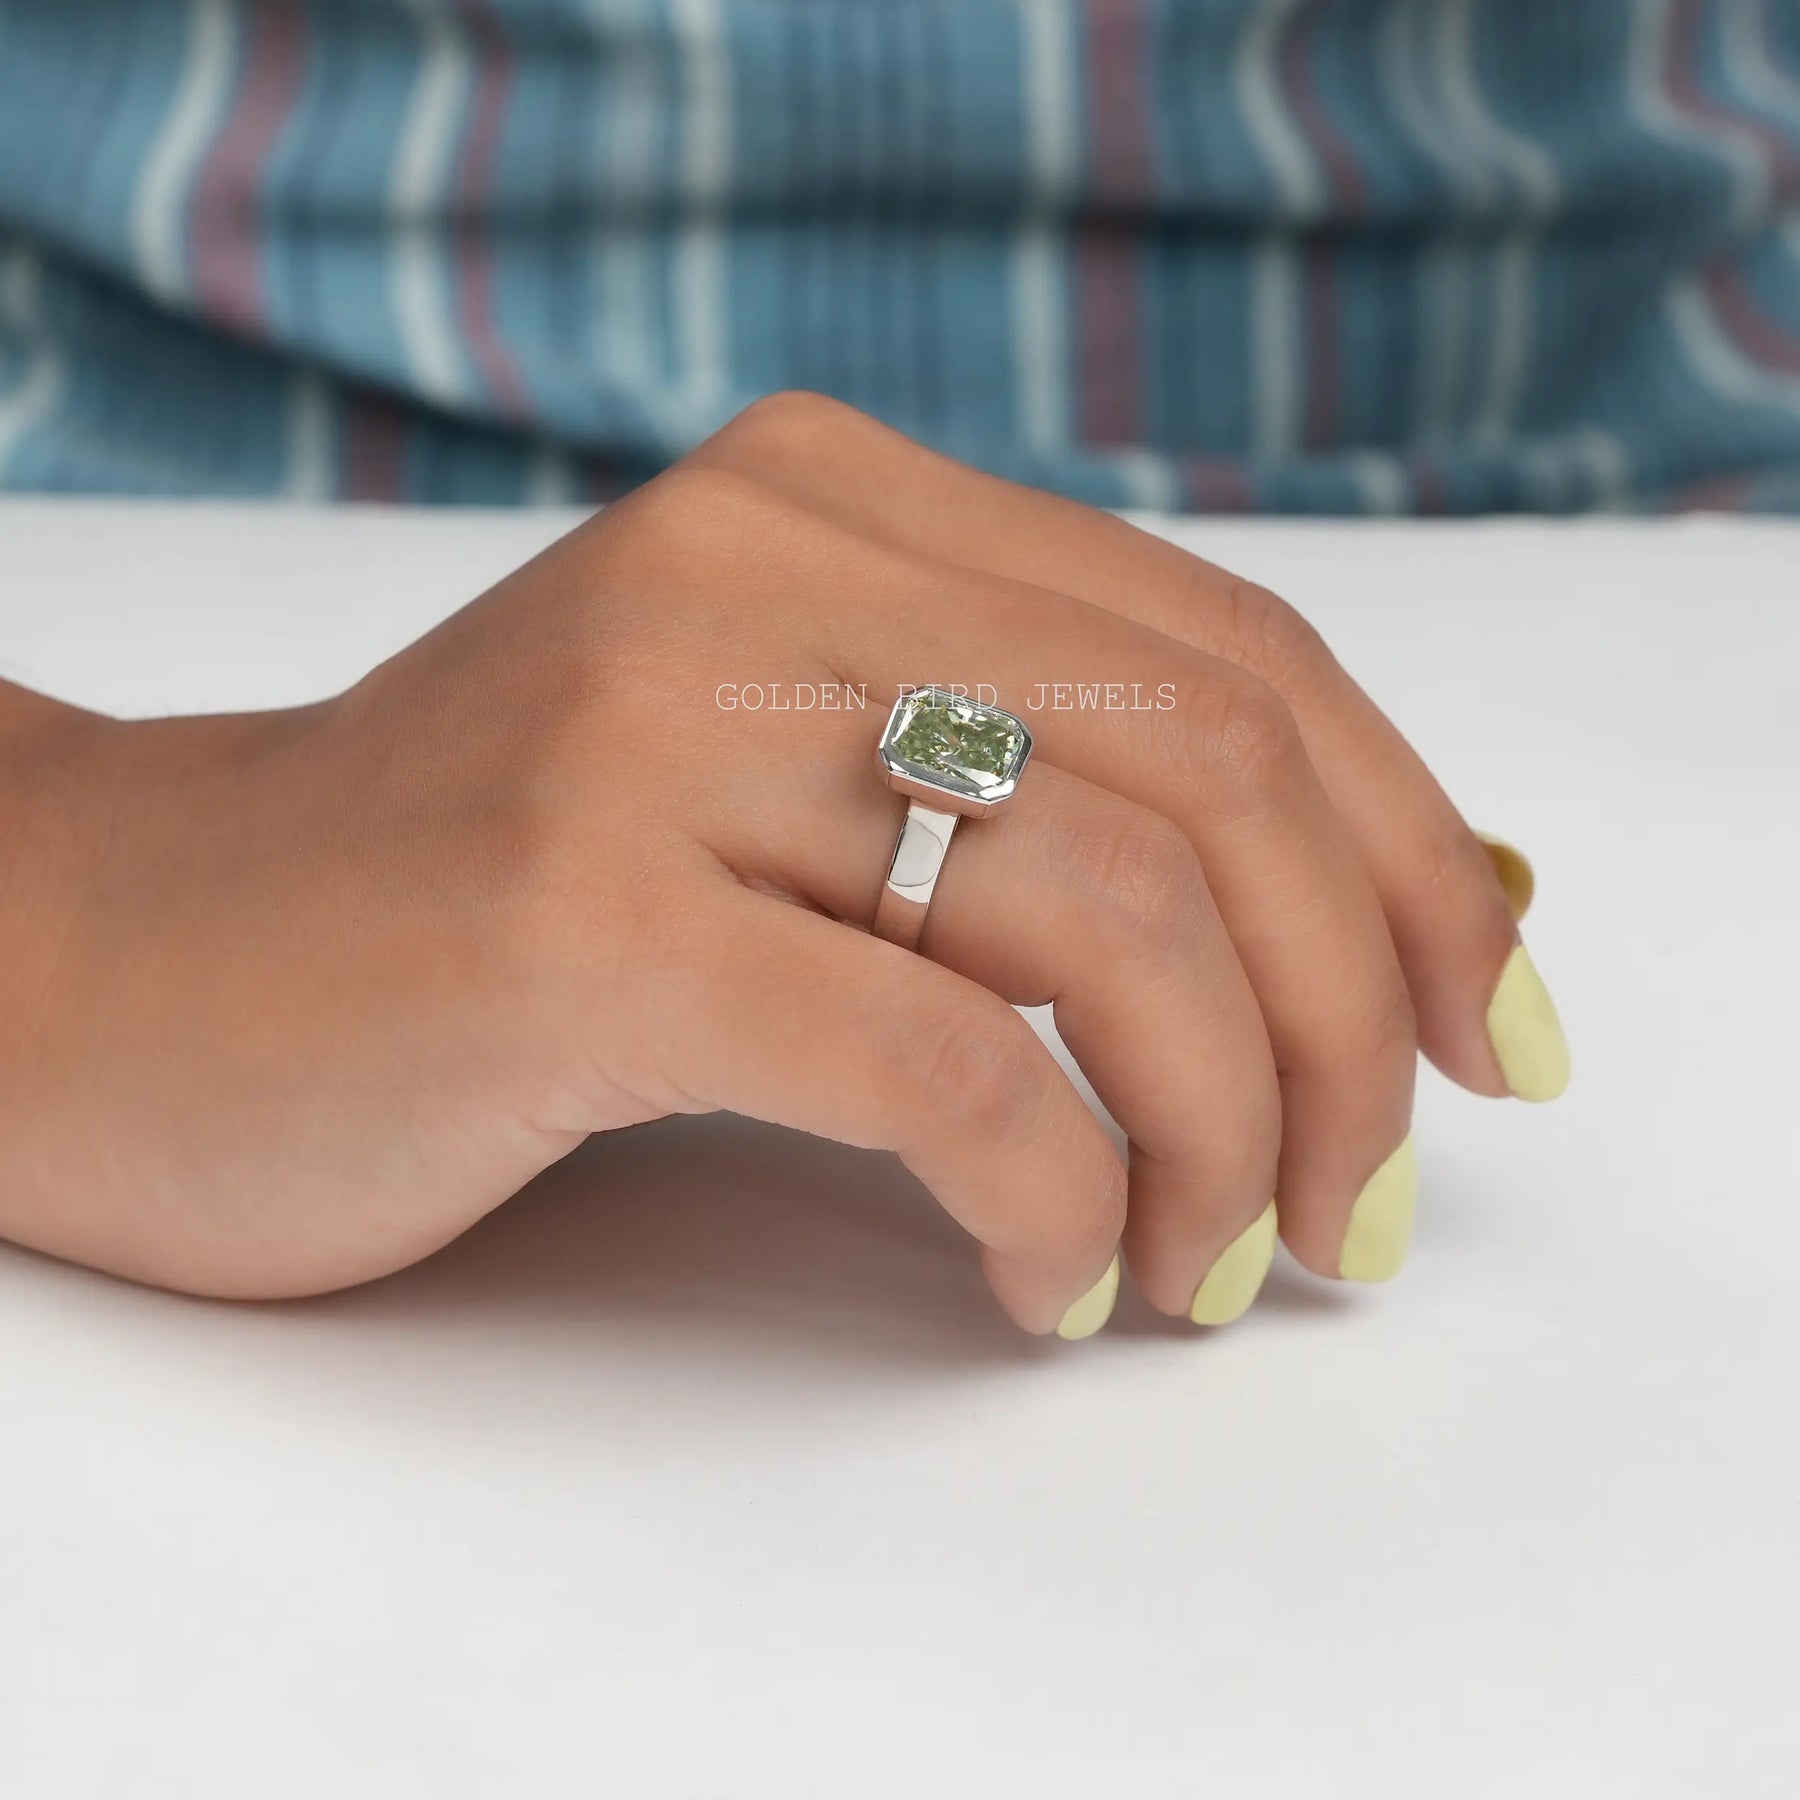 [White Gold Mint Green Radiant Cut Solitaire Ring]-[Golden Bird Jewels]